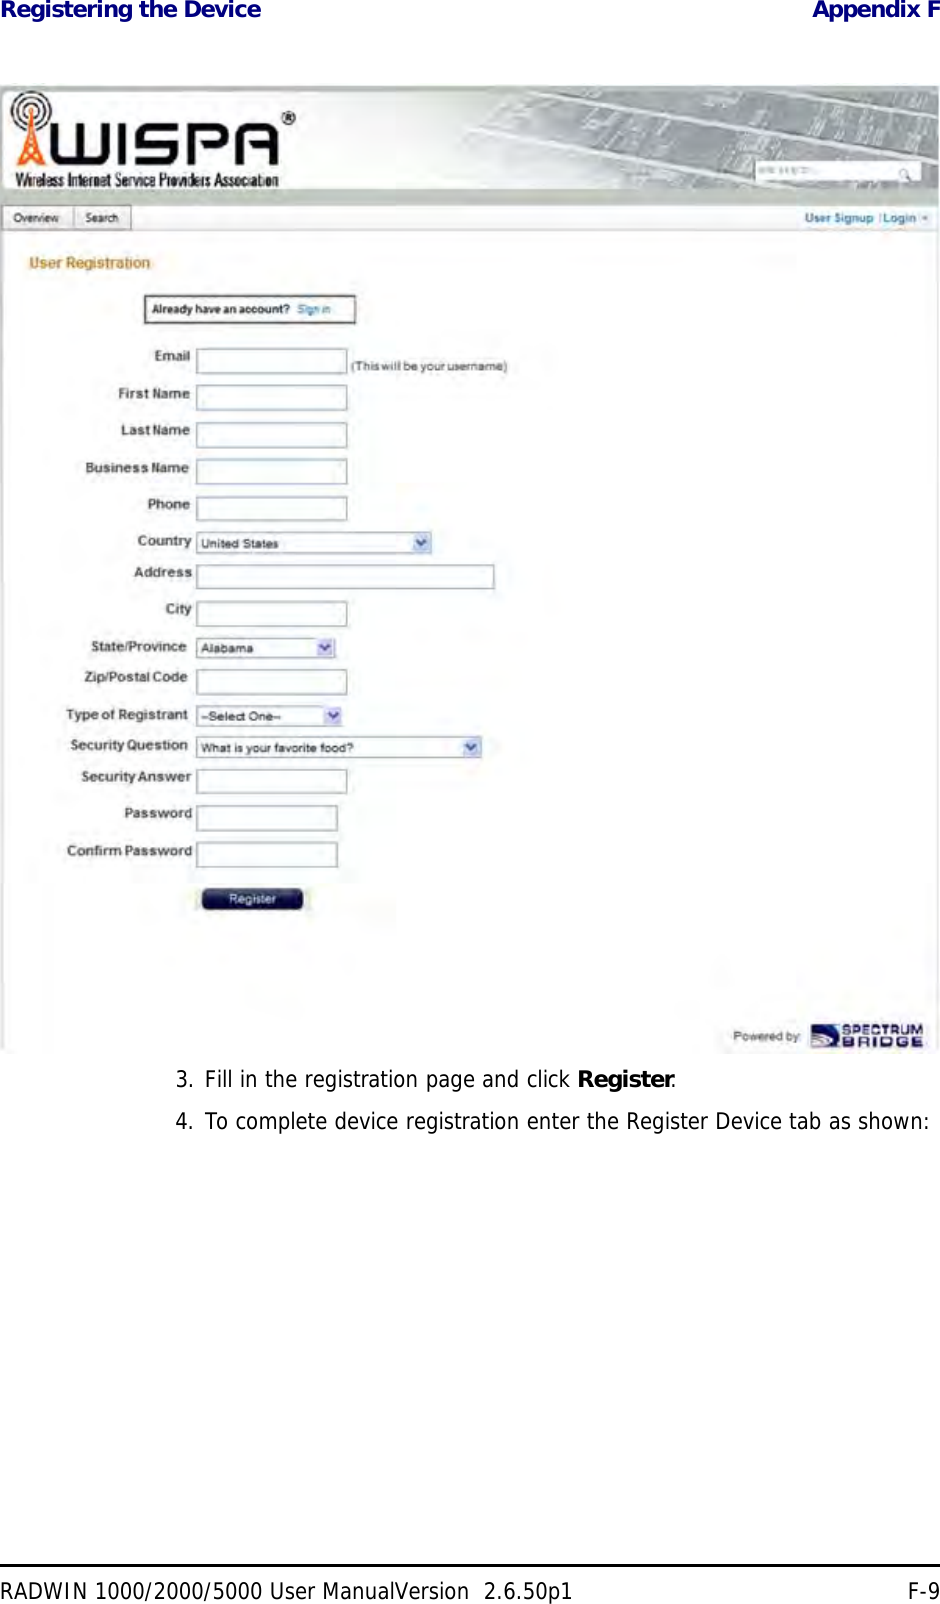 Registering the Device Appendix FRADWIN 1000/2000/5000 User ManualVersion  2.6.50p1 F-93. Fill in the registration page and click Register.4. To complete device registration enter the Register Device tab as shown: